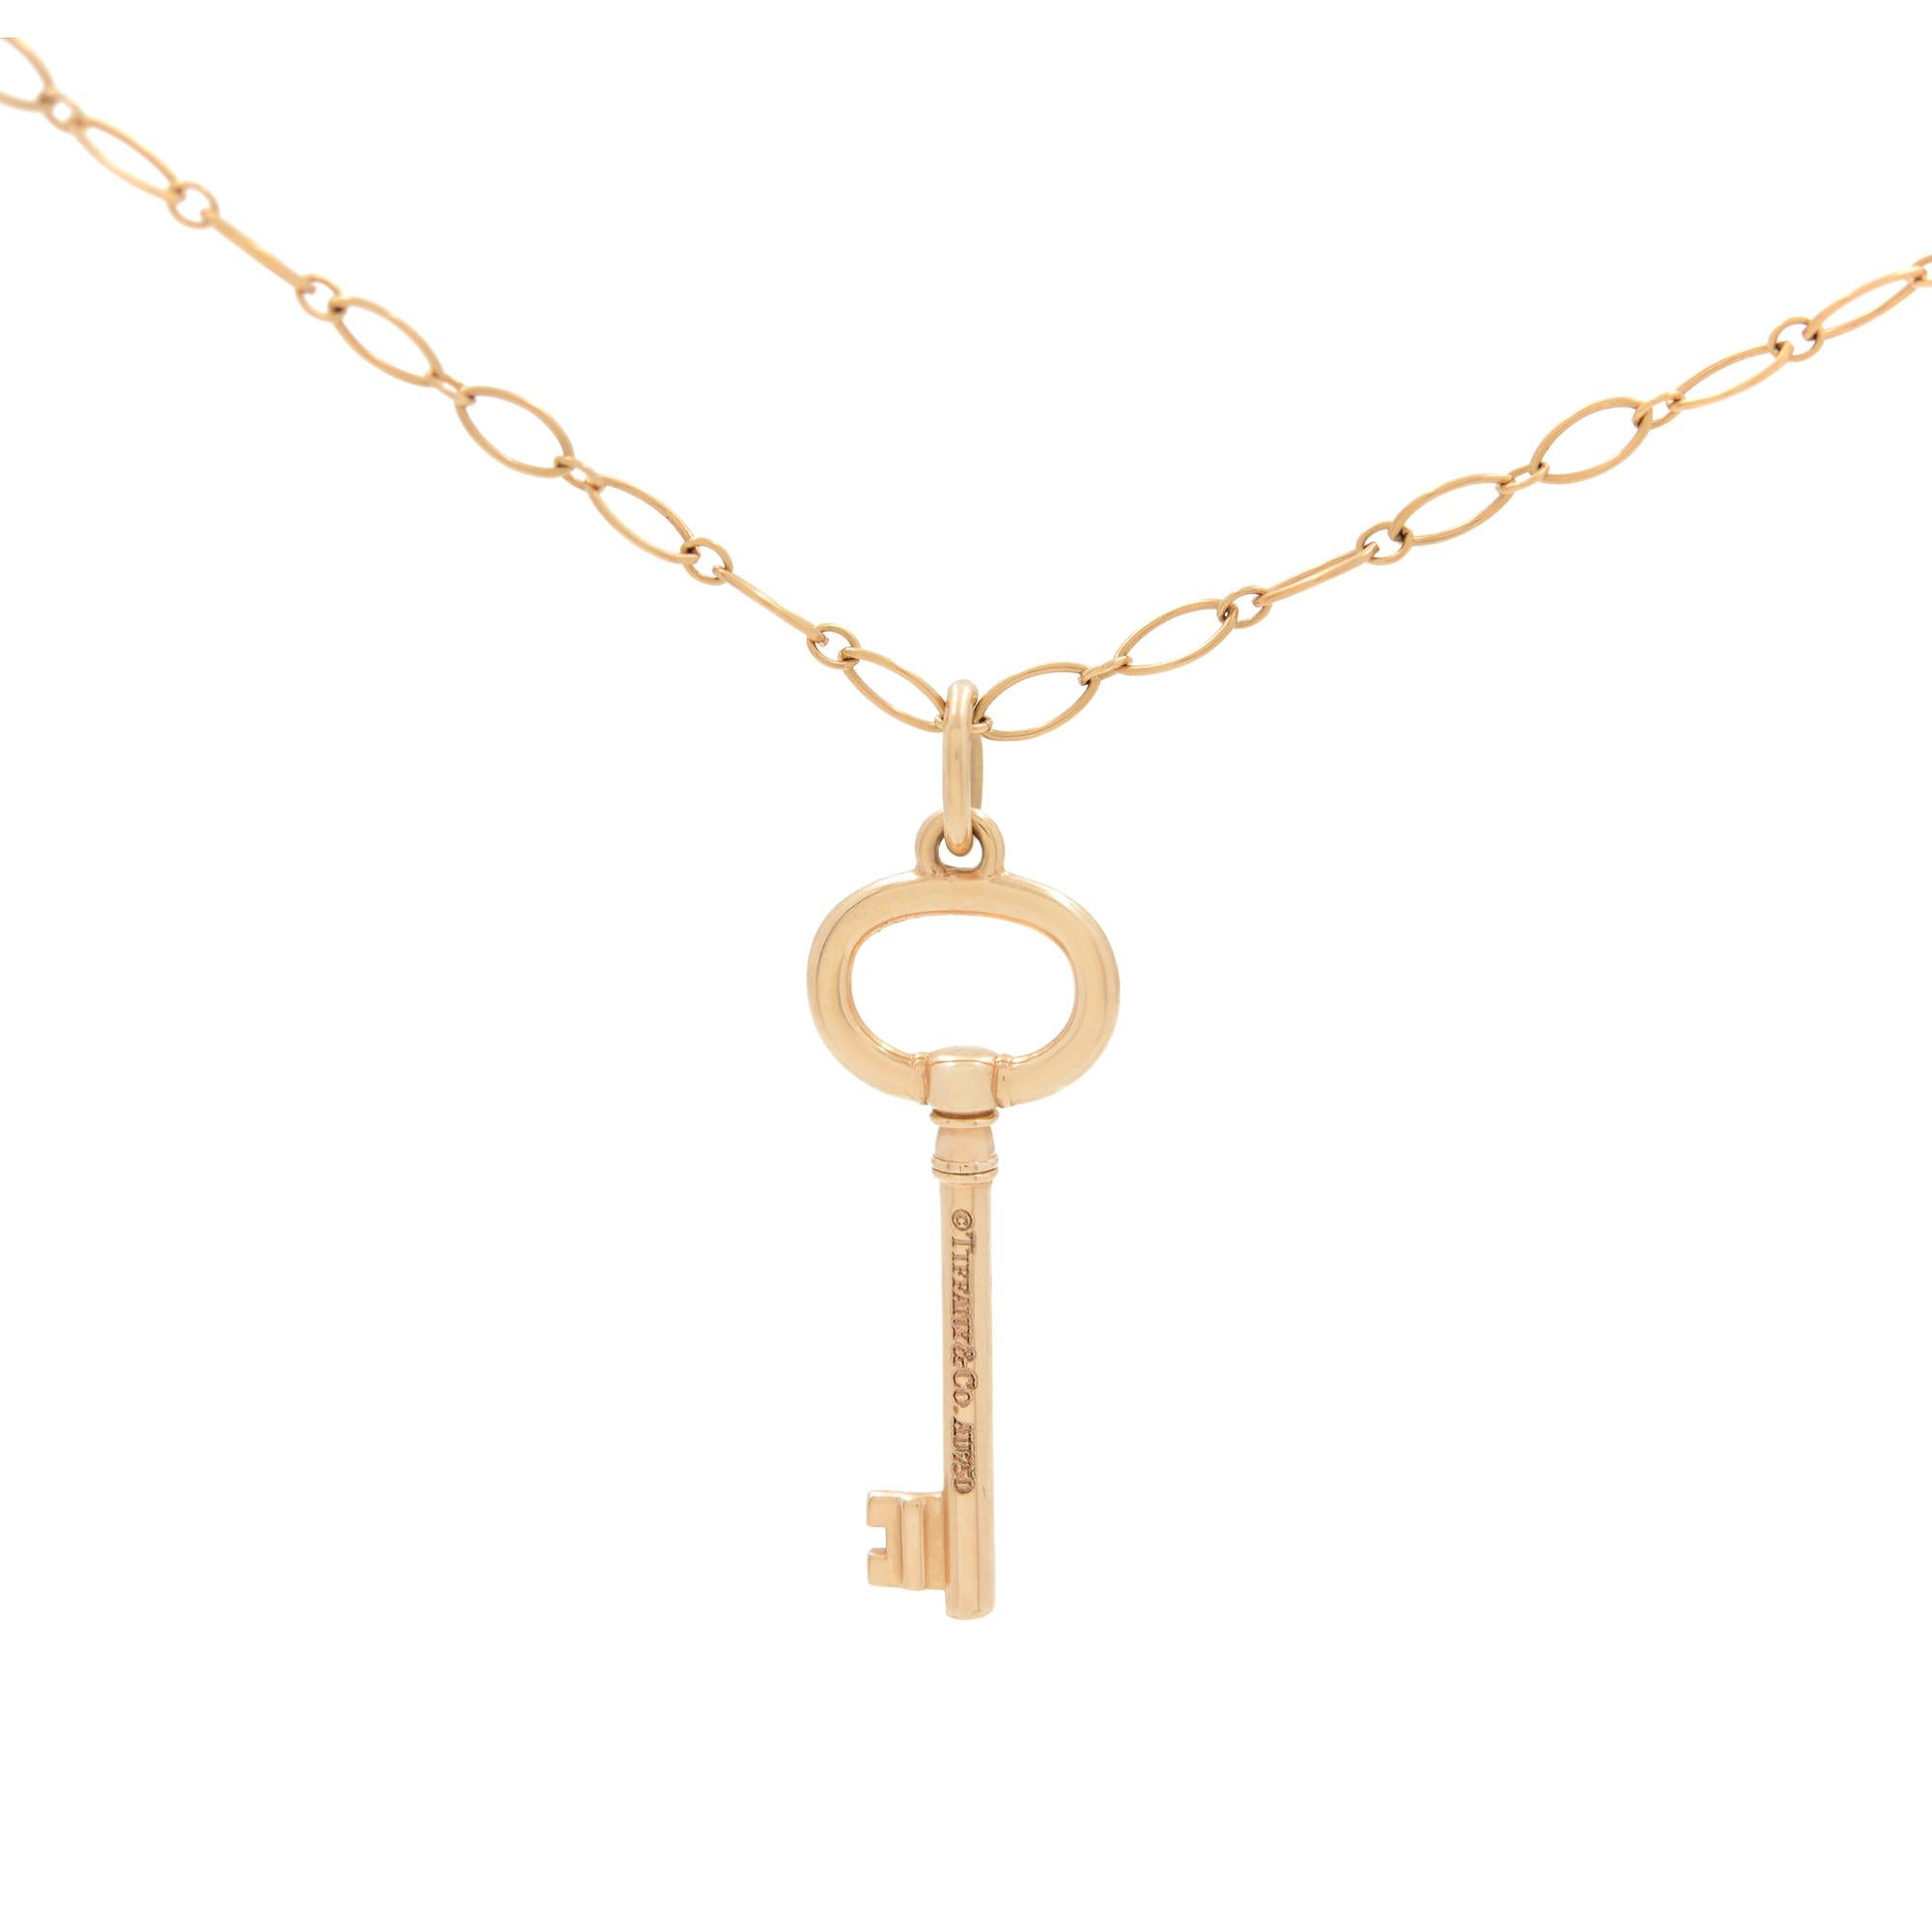 This 18k rose gold Tiffany & Co Key Pendant is completed by an 20 inches ball chain. Pendant size: 1.50 inches. Excellent pre-owned condition. Tiffany & Co hallmarked. Original box and papers are not included. 

